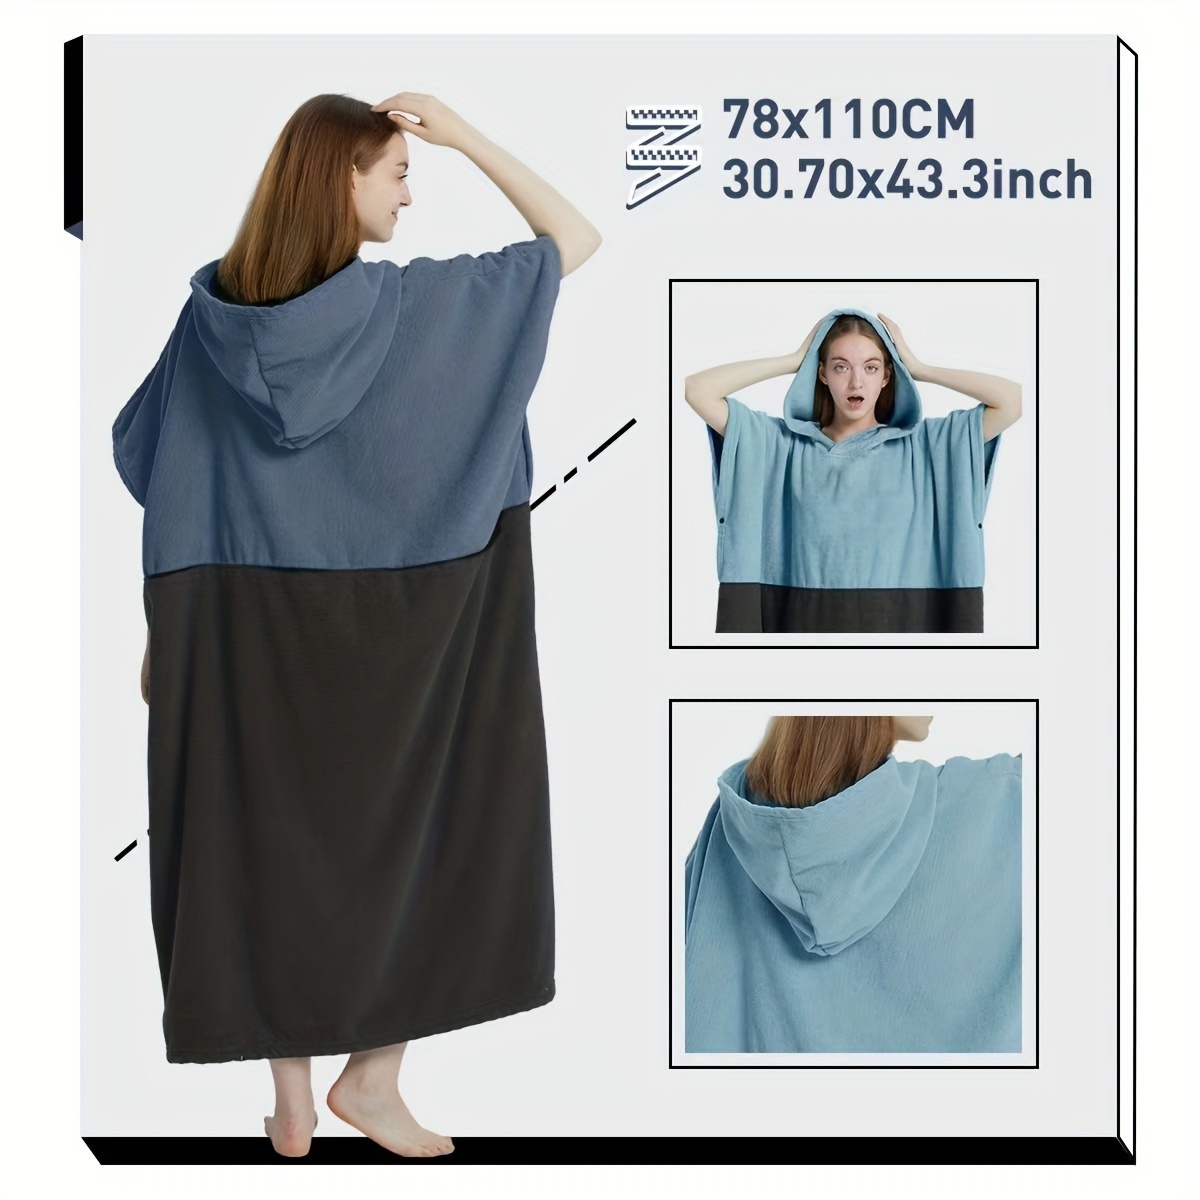 10 Best Surf Ponchos and Hooded Towel Ponchos Reviewed